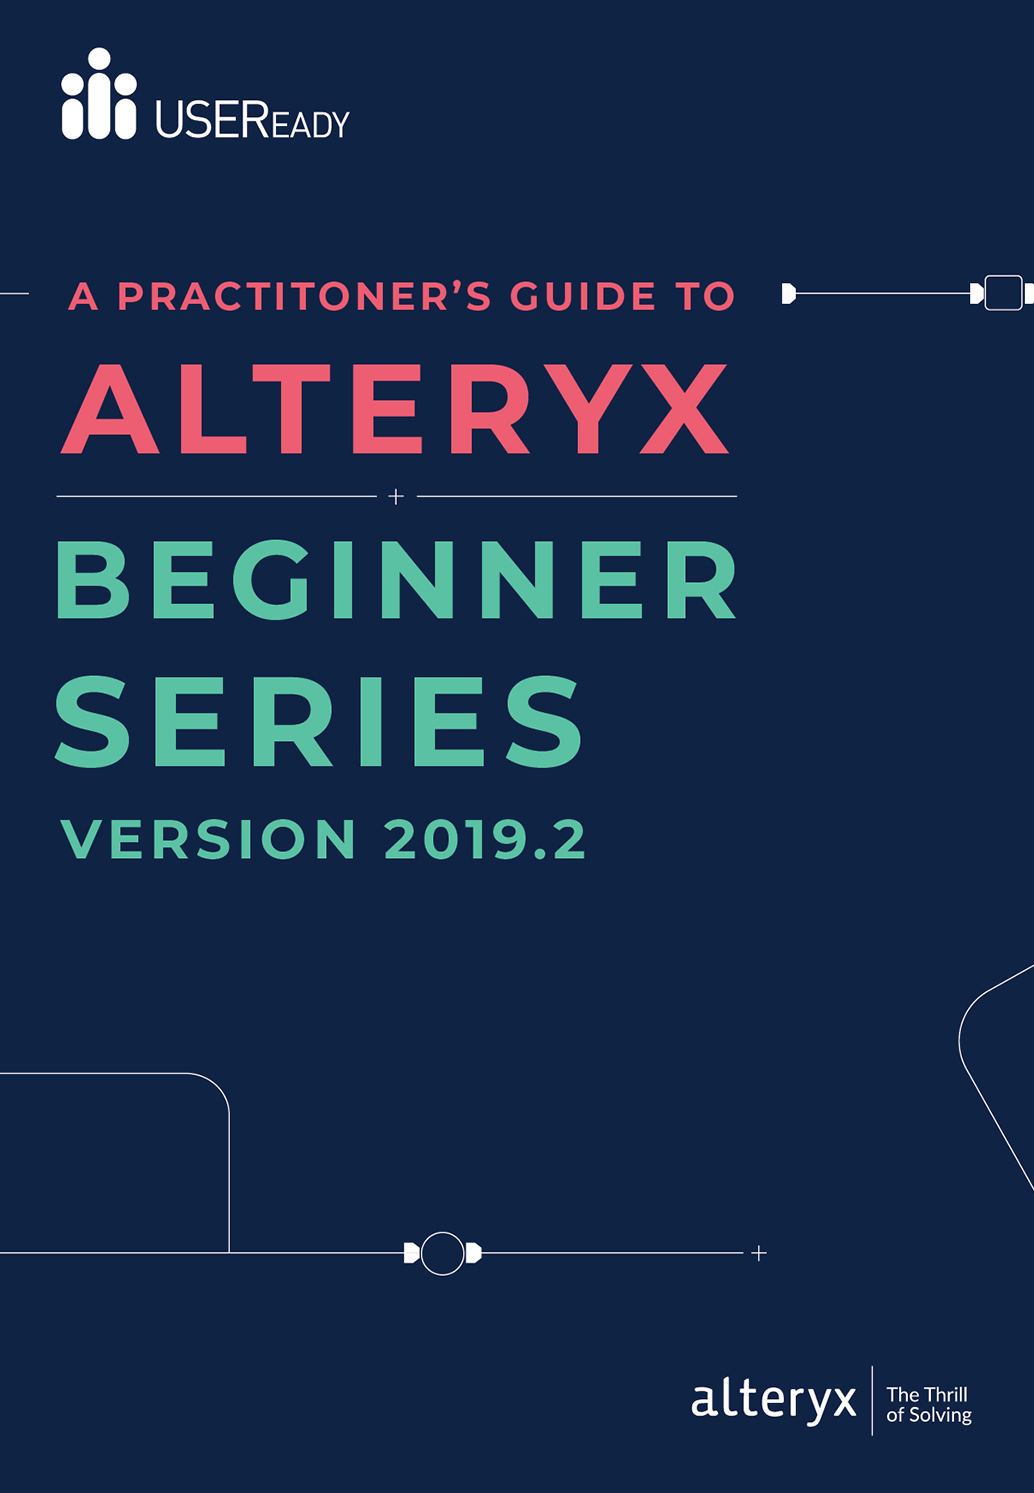 A Practitioners Guide To Alteryx Beginner Series 2019.2